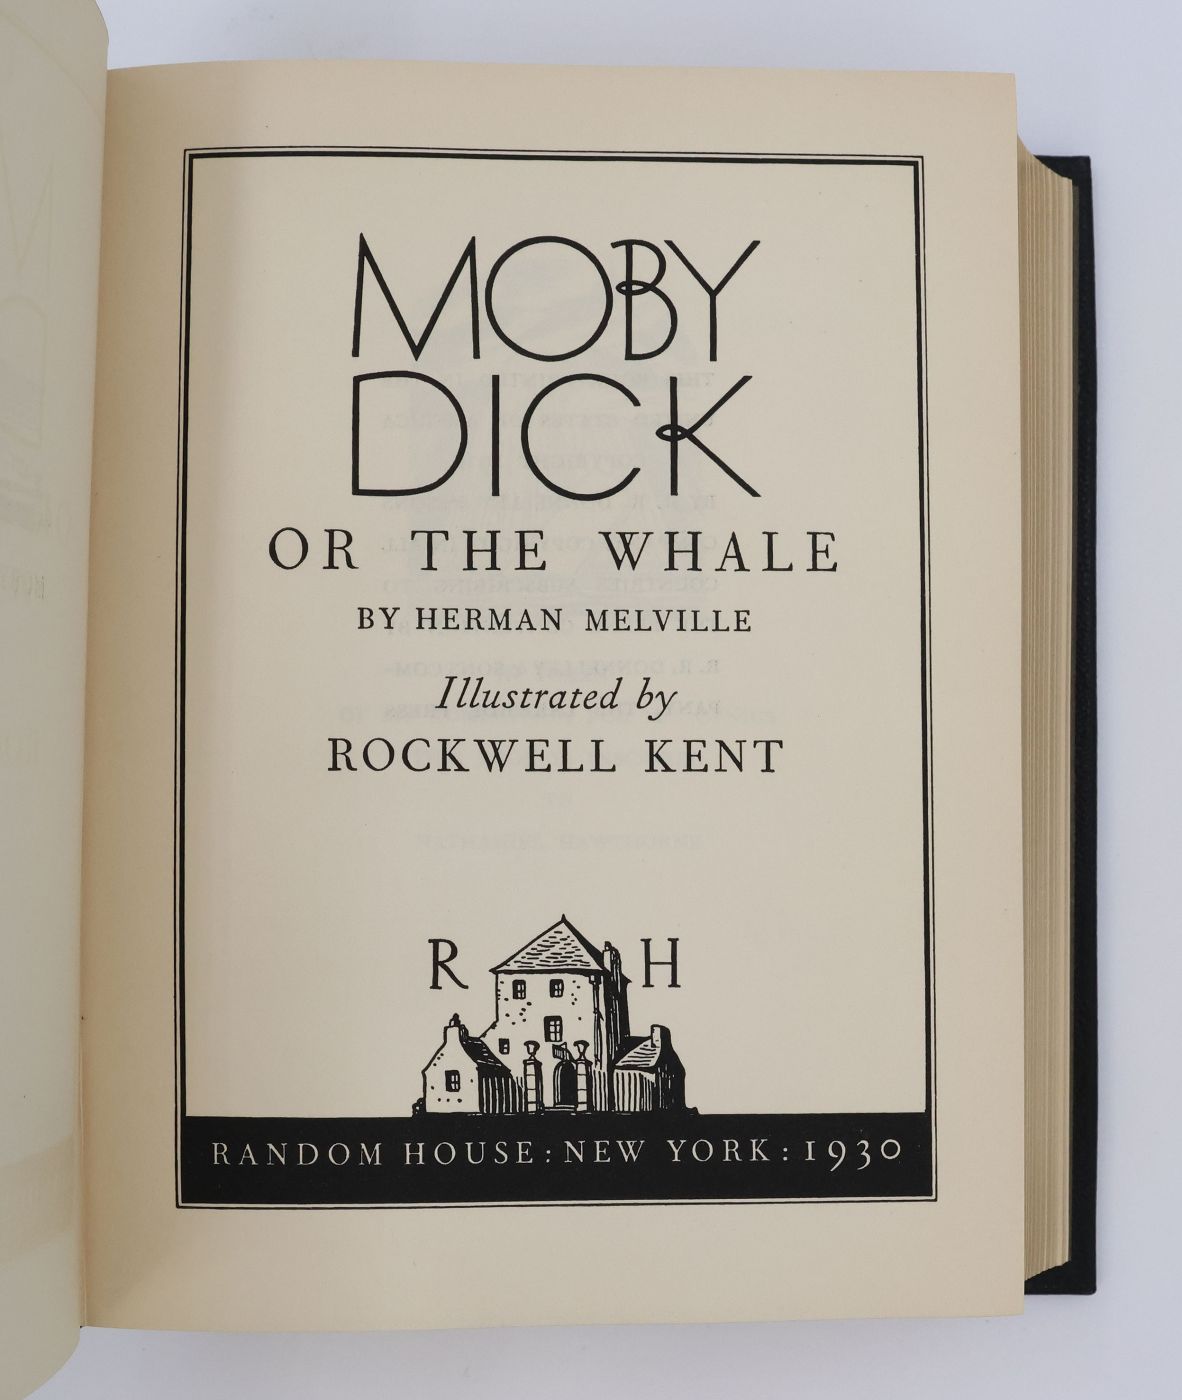 MOBY DICK, -  image 4